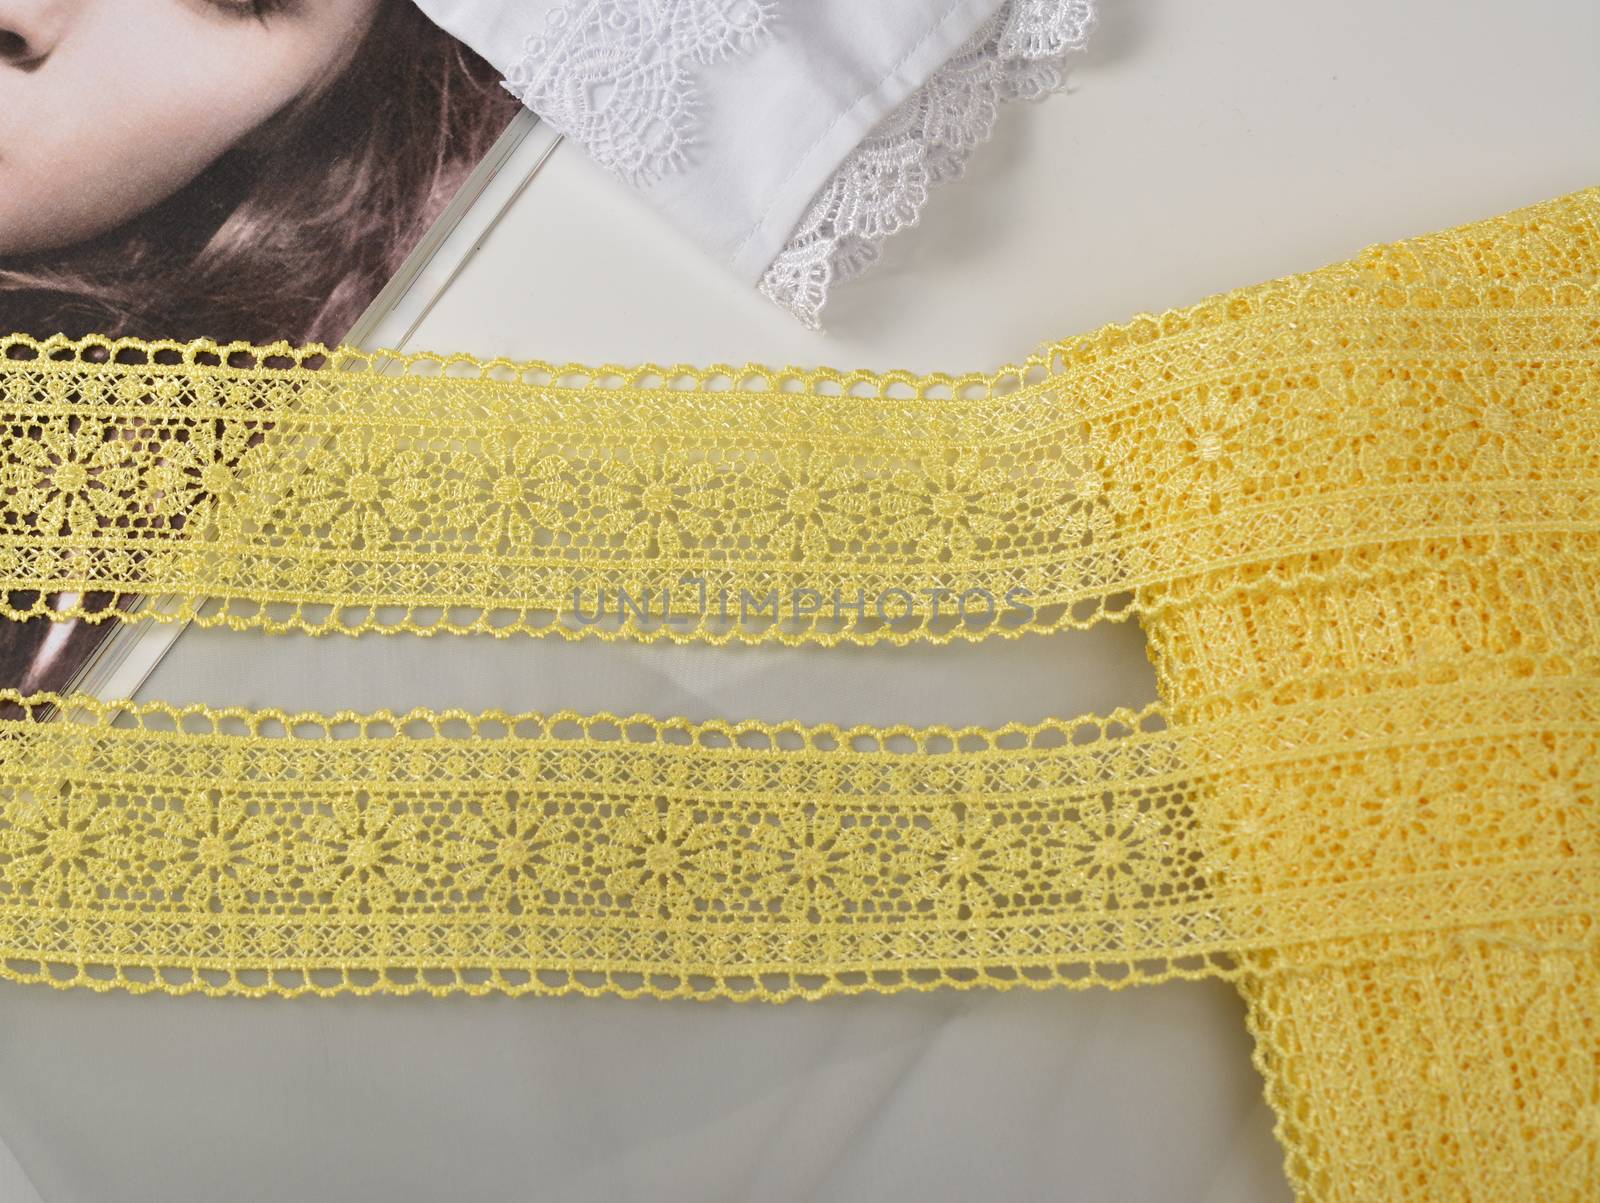 Tapes of yellow gentle guipure, beauty lace fabric. Elastic material. Using for Atelier and needlework store. Space for text. repeating pattern and interweaving threads. texture for websites